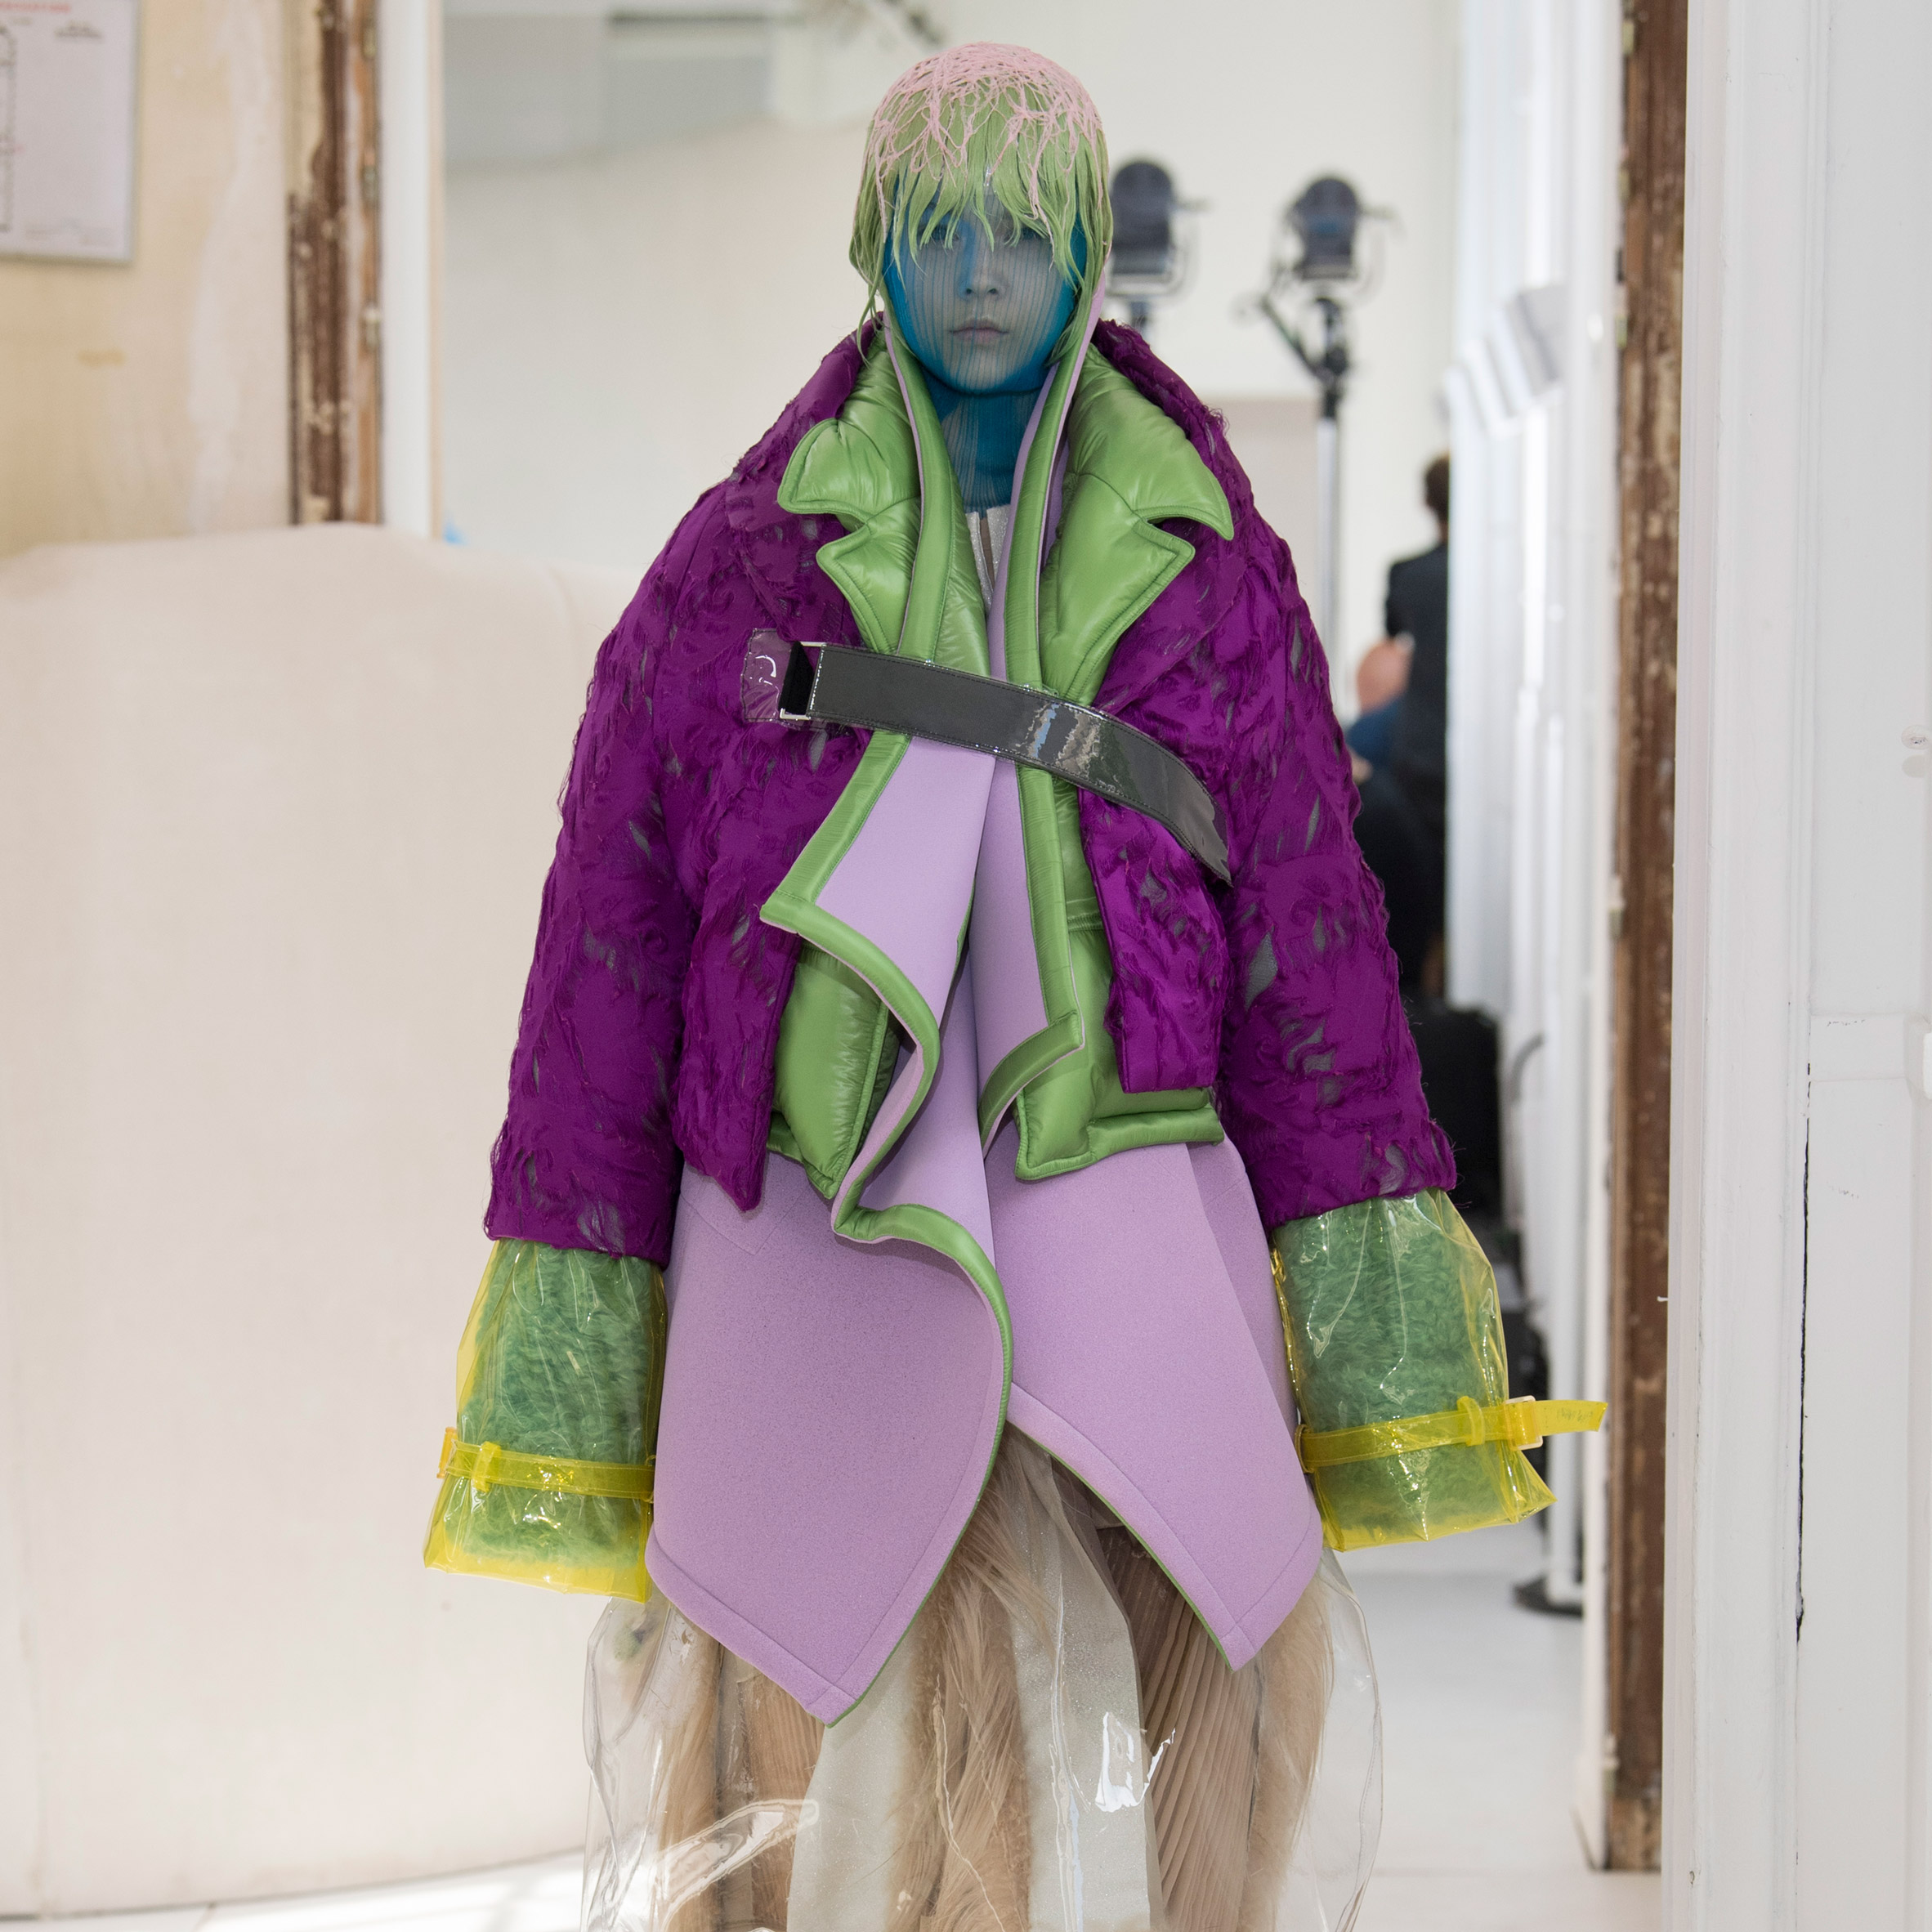 Maison Margiela's Artisanal couture collection is designed for 